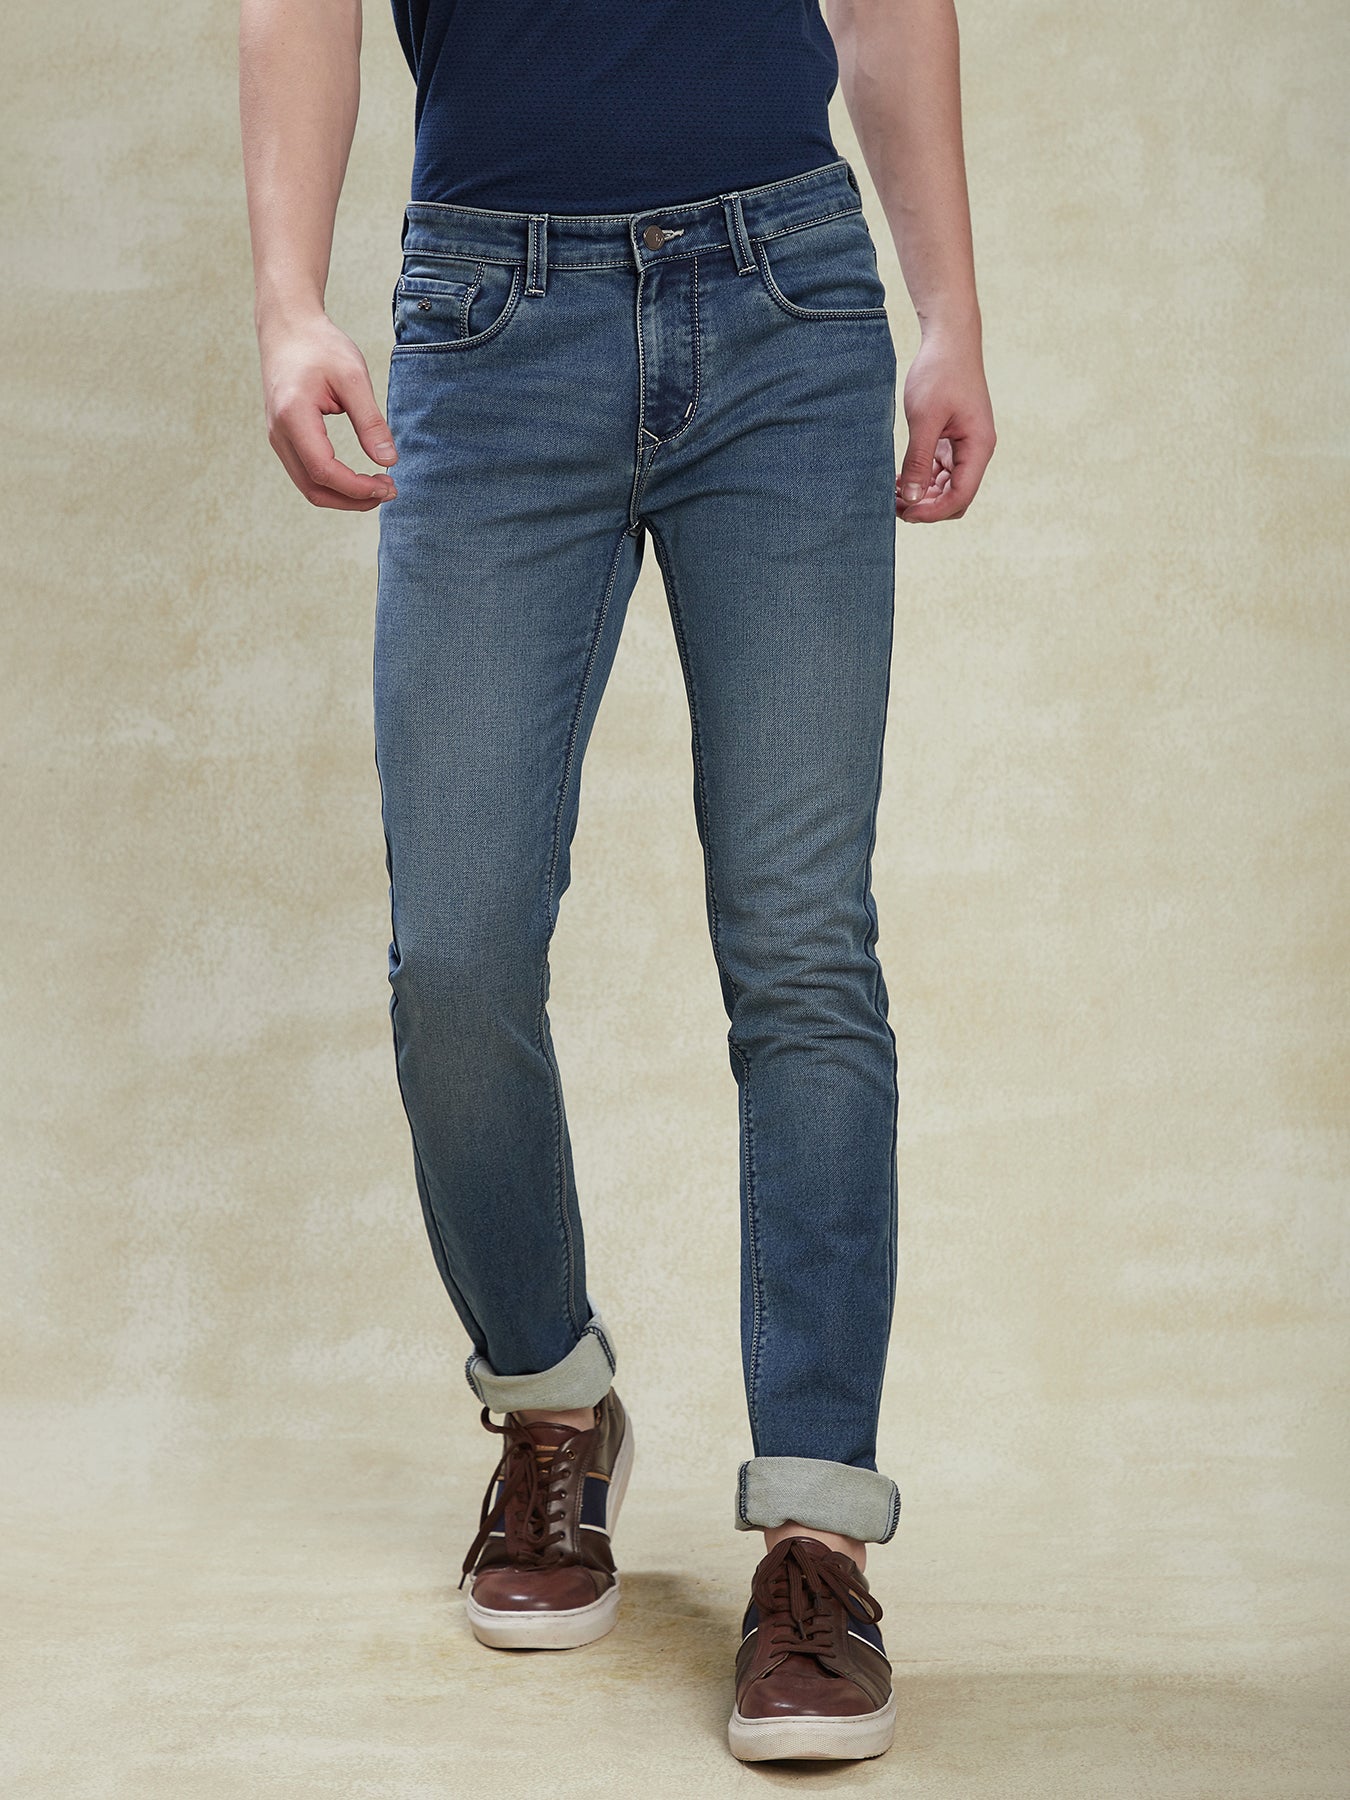 cotton-stretch-blue-narrow-fit-flat-front-casual-mens-jeans